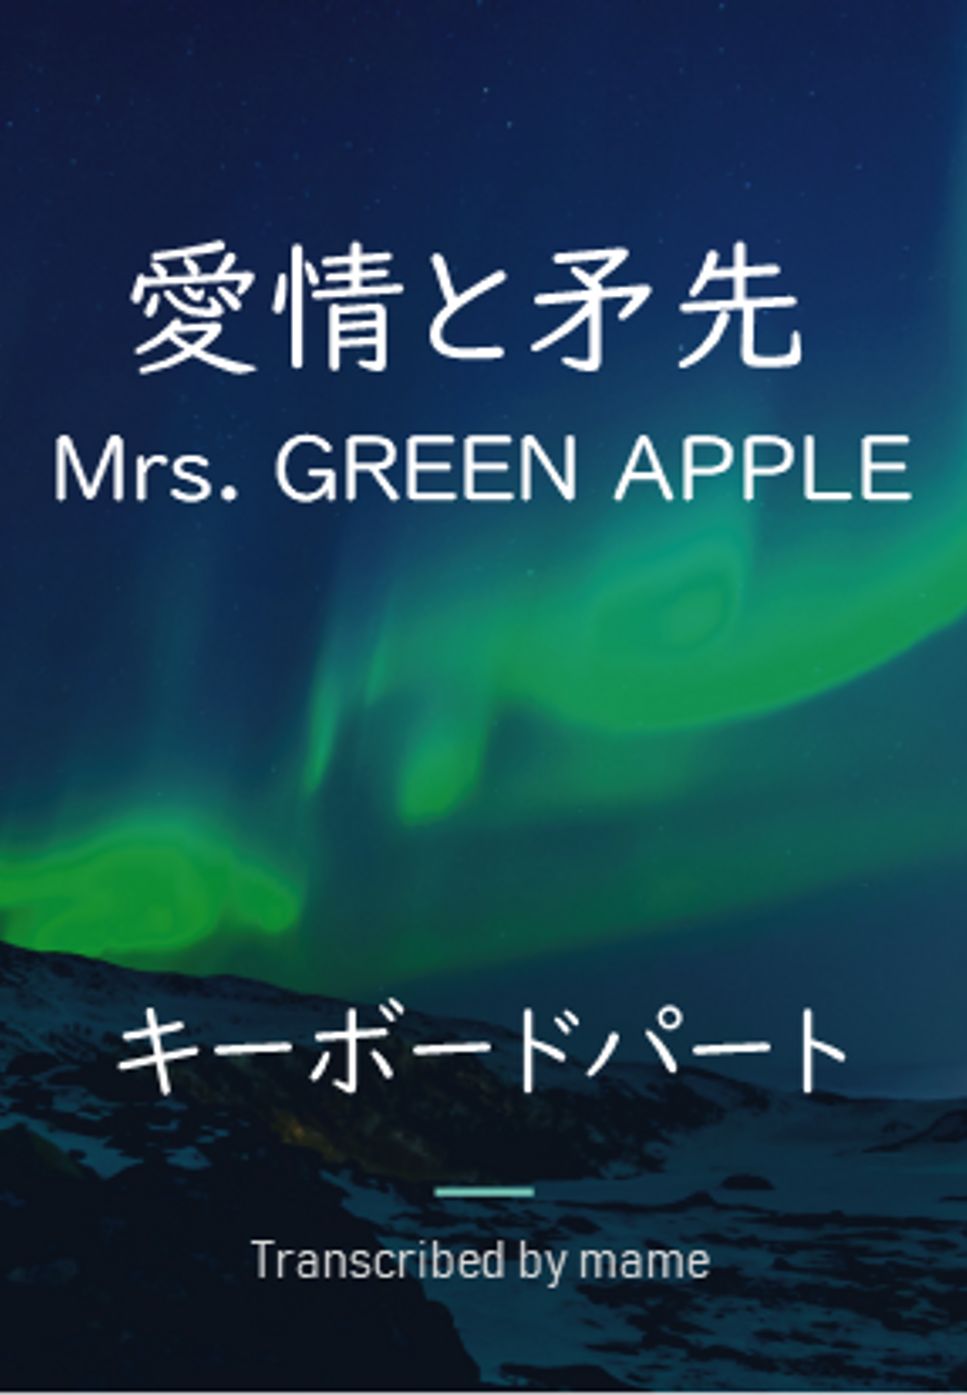 Mrs. GREEN APPLE - 愛情と矛先 (keyboard part) by mame